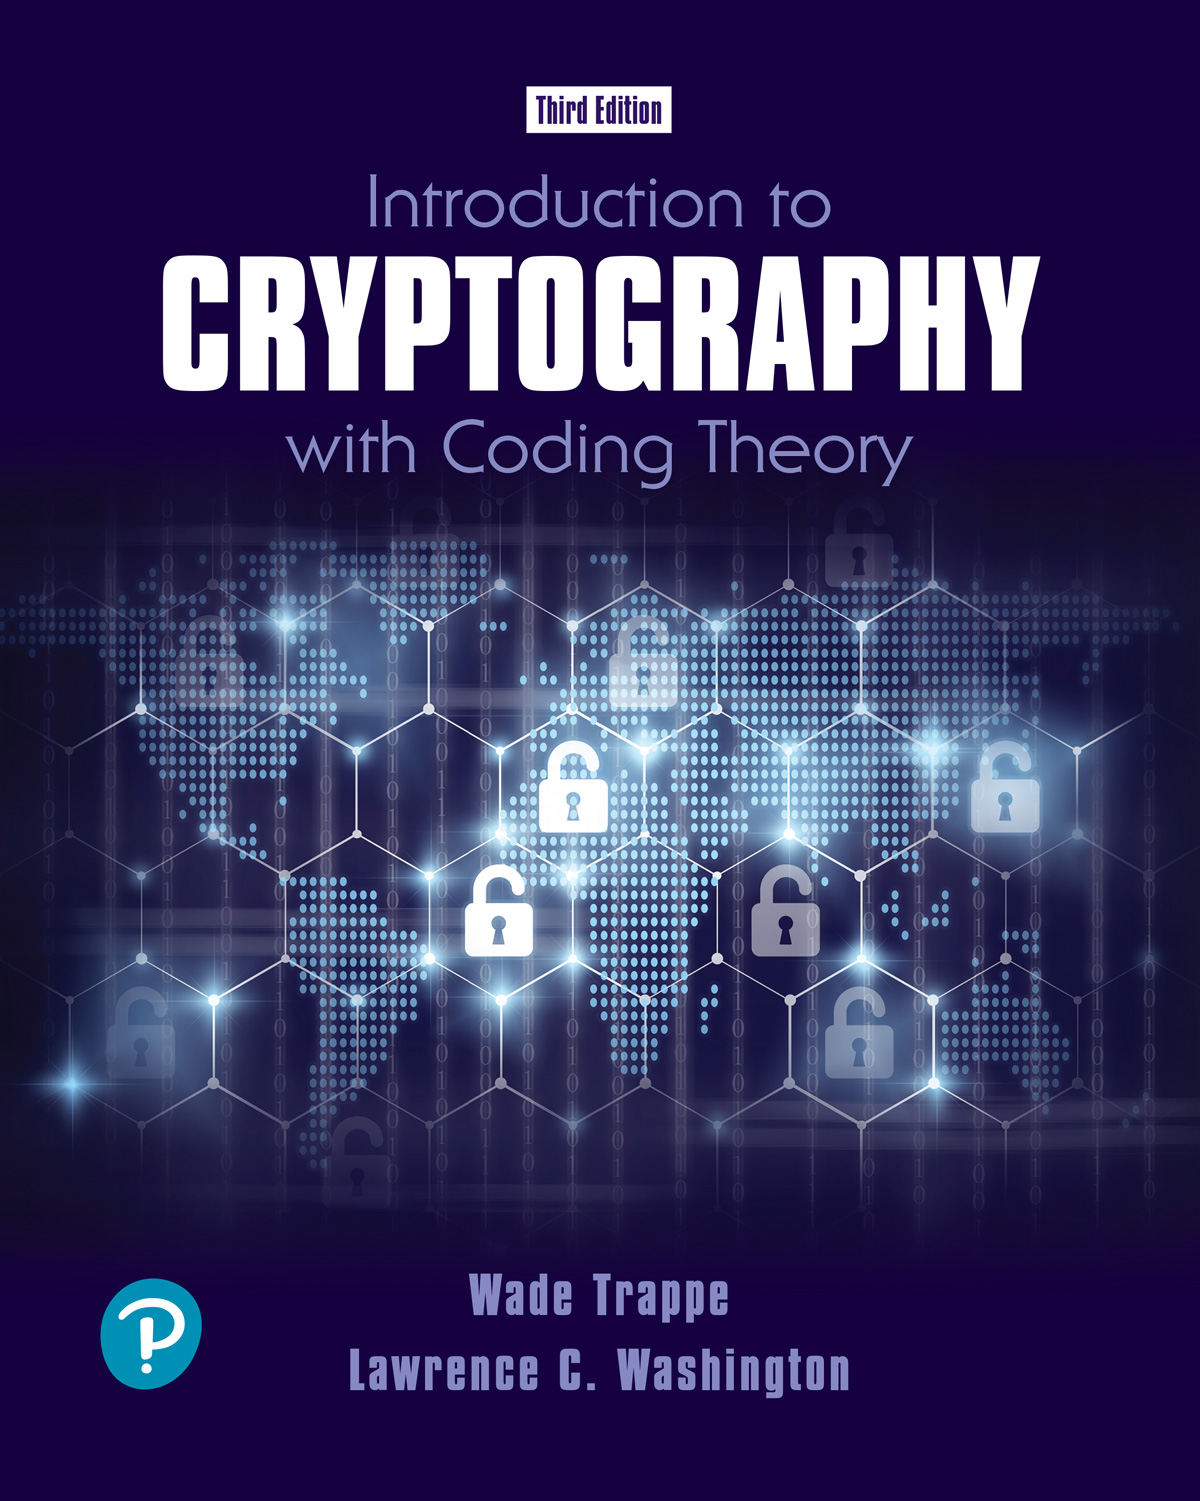 Book Cover, Introduction to Cryptography with Coding Theory, 3/e by Wade Trappe, Lawrence C. Washington, Pearson, 2020